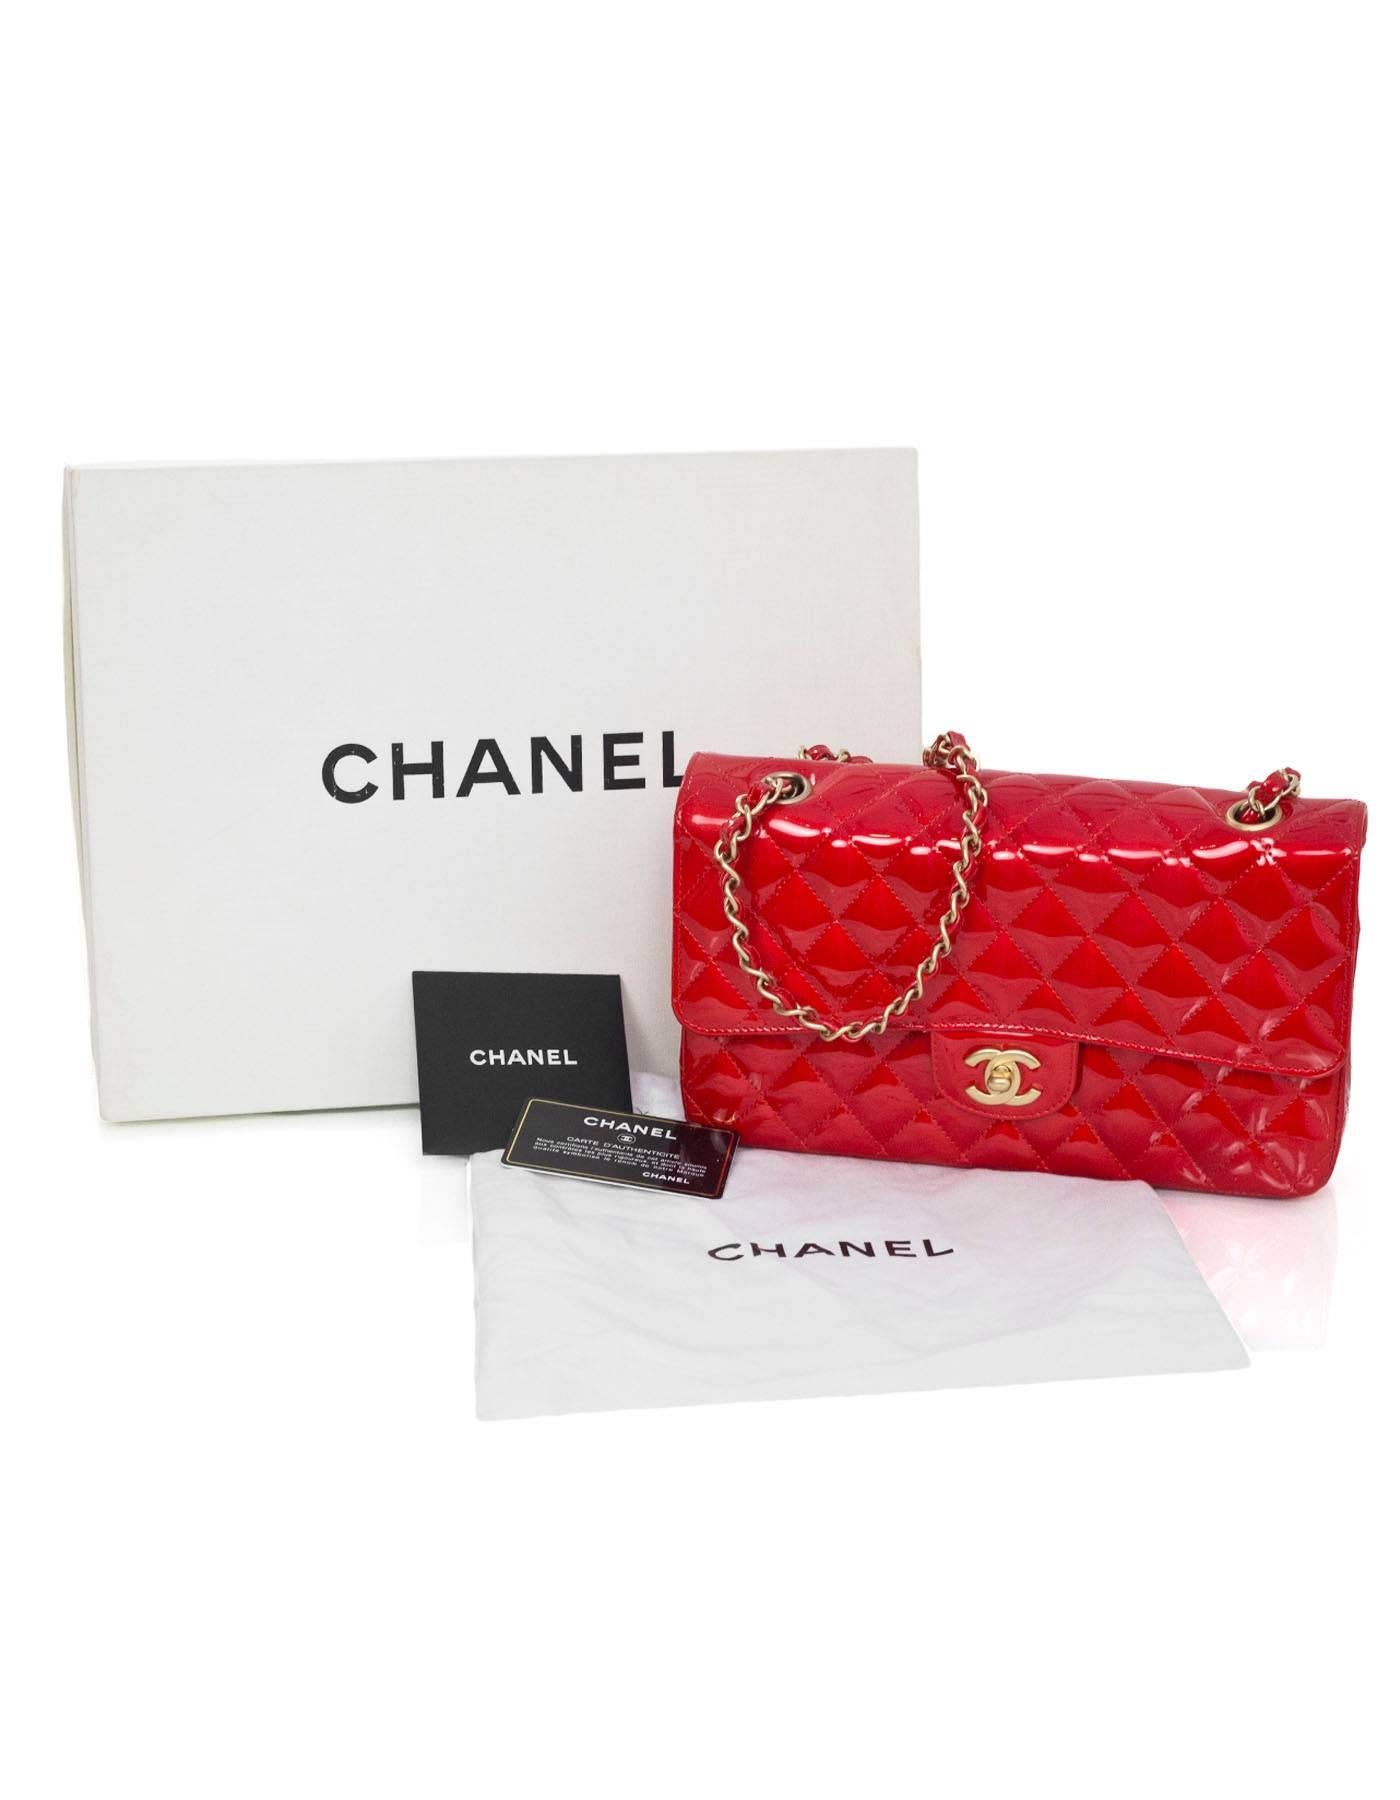 Chanel Collector's Mobile Art Show Signed Red Patent 10